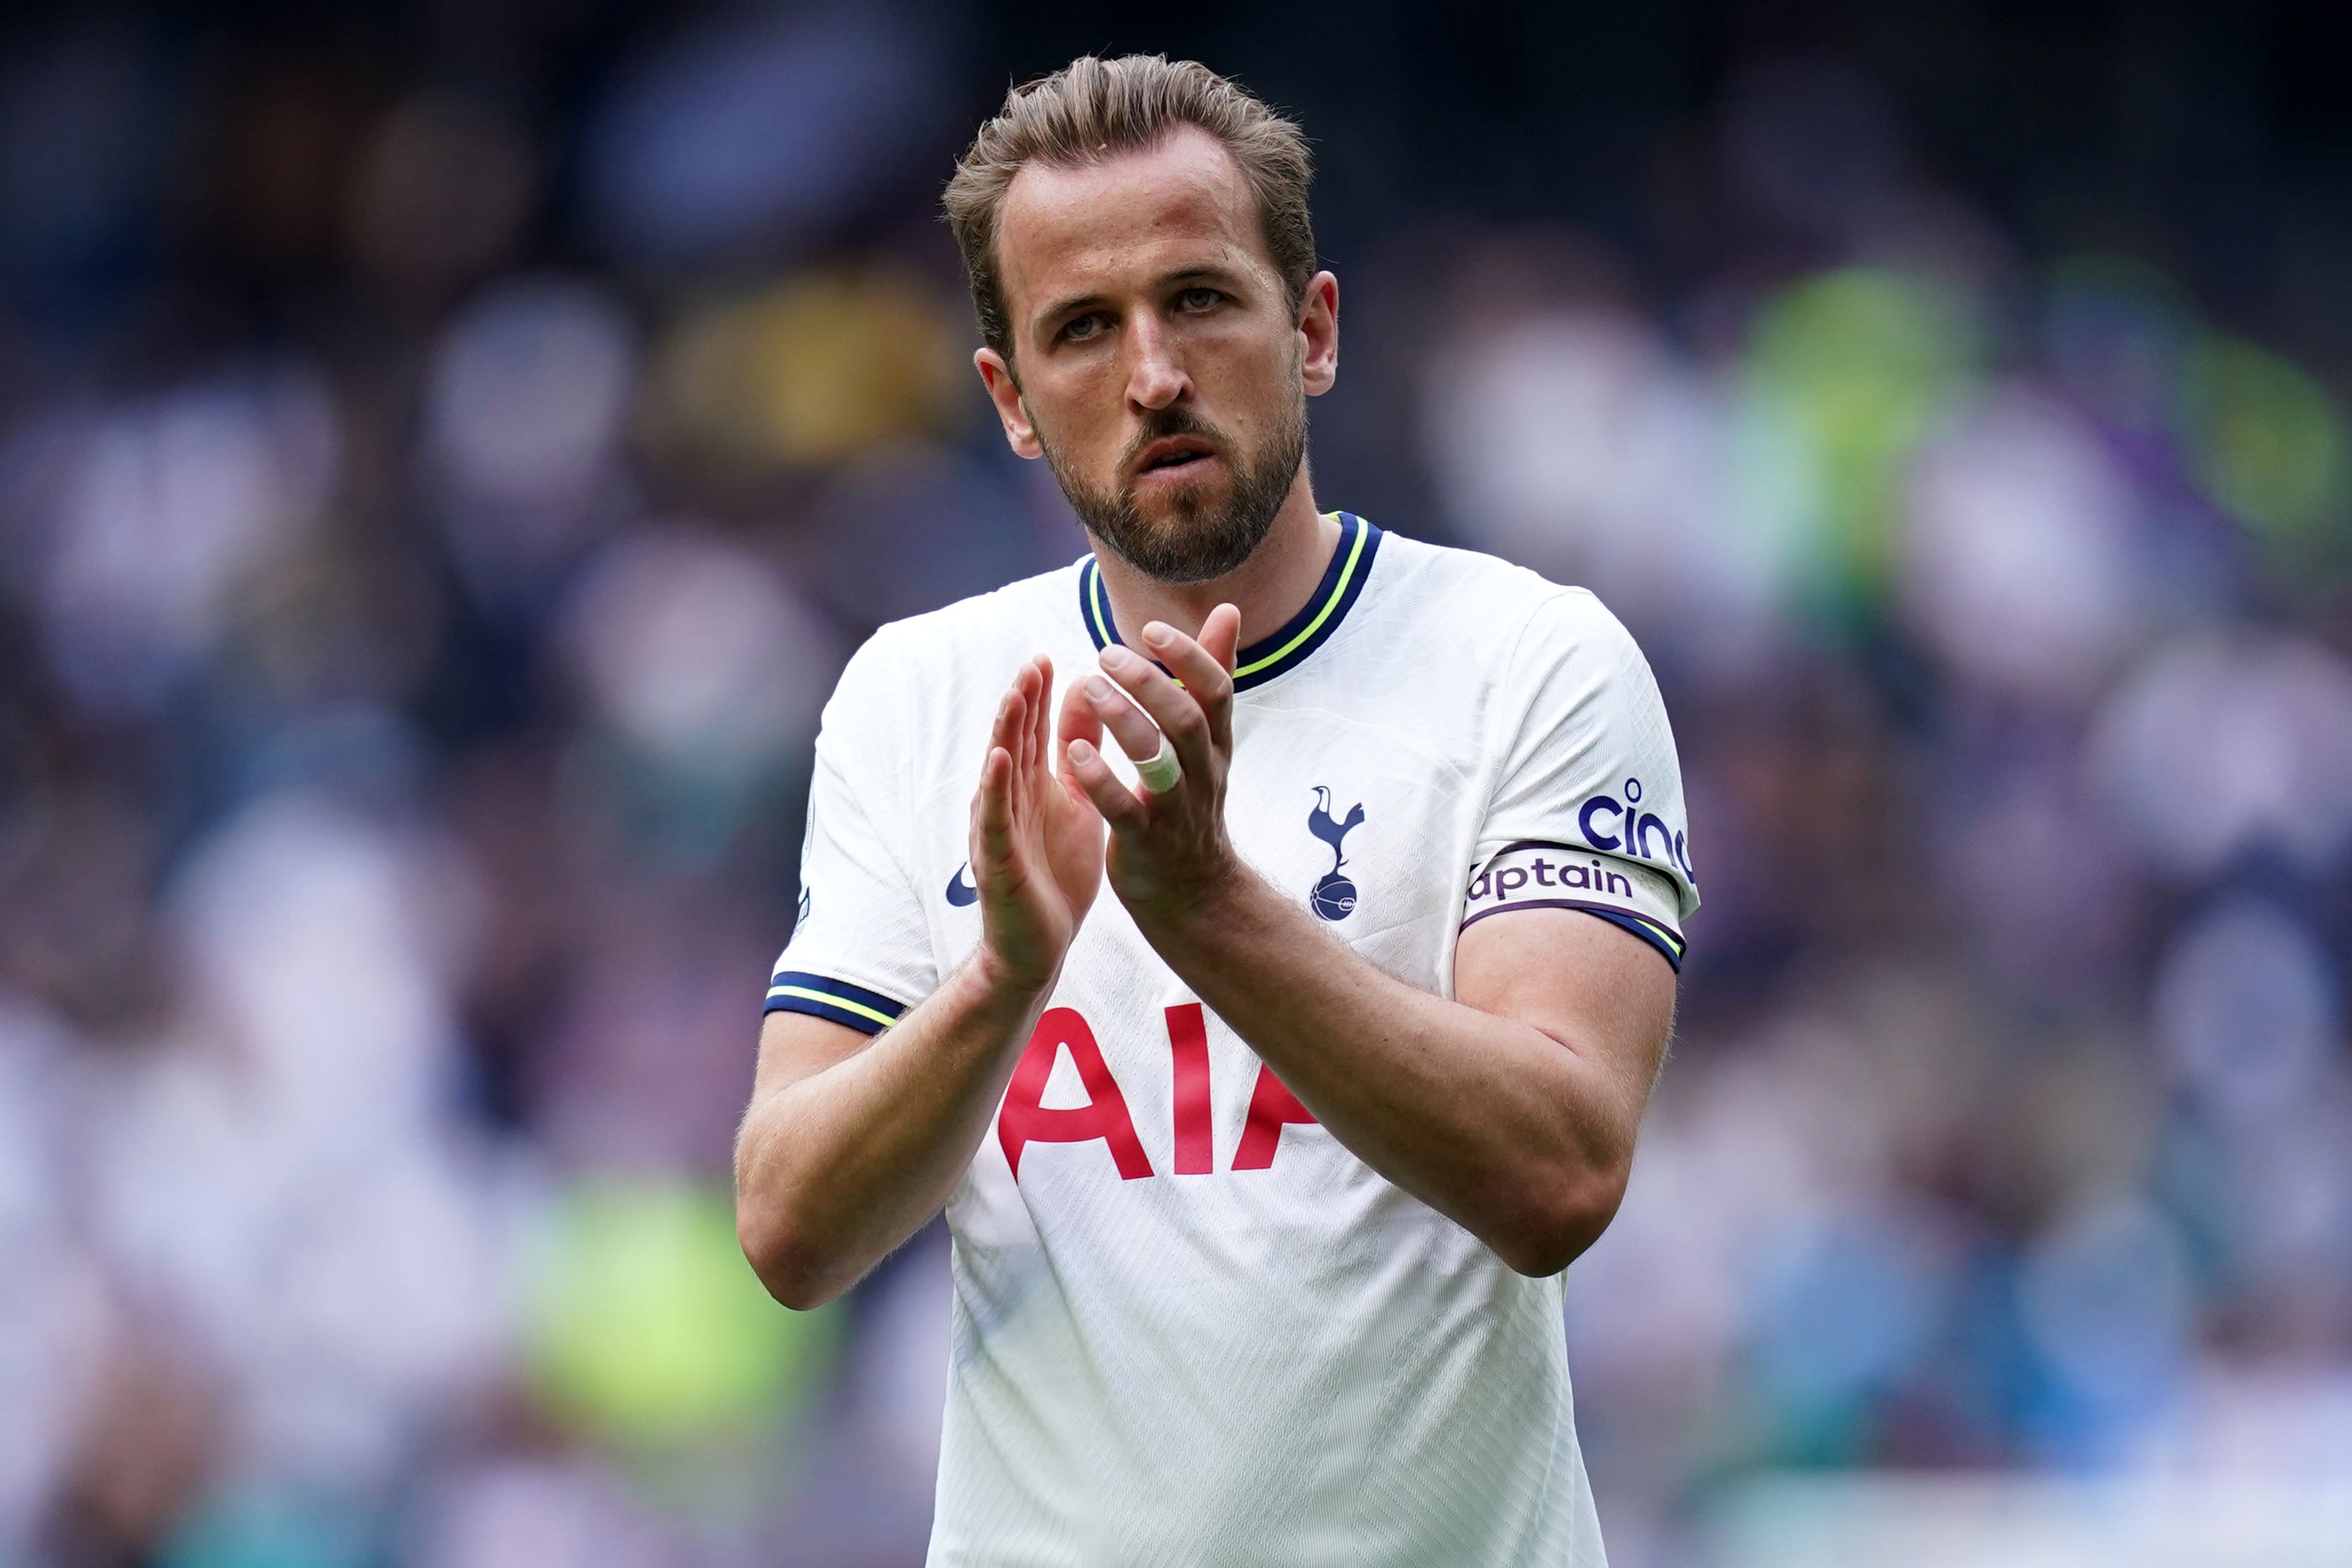  Harry Kane, the captain of Tottenham Hotspur, applauds the crowd after a match.